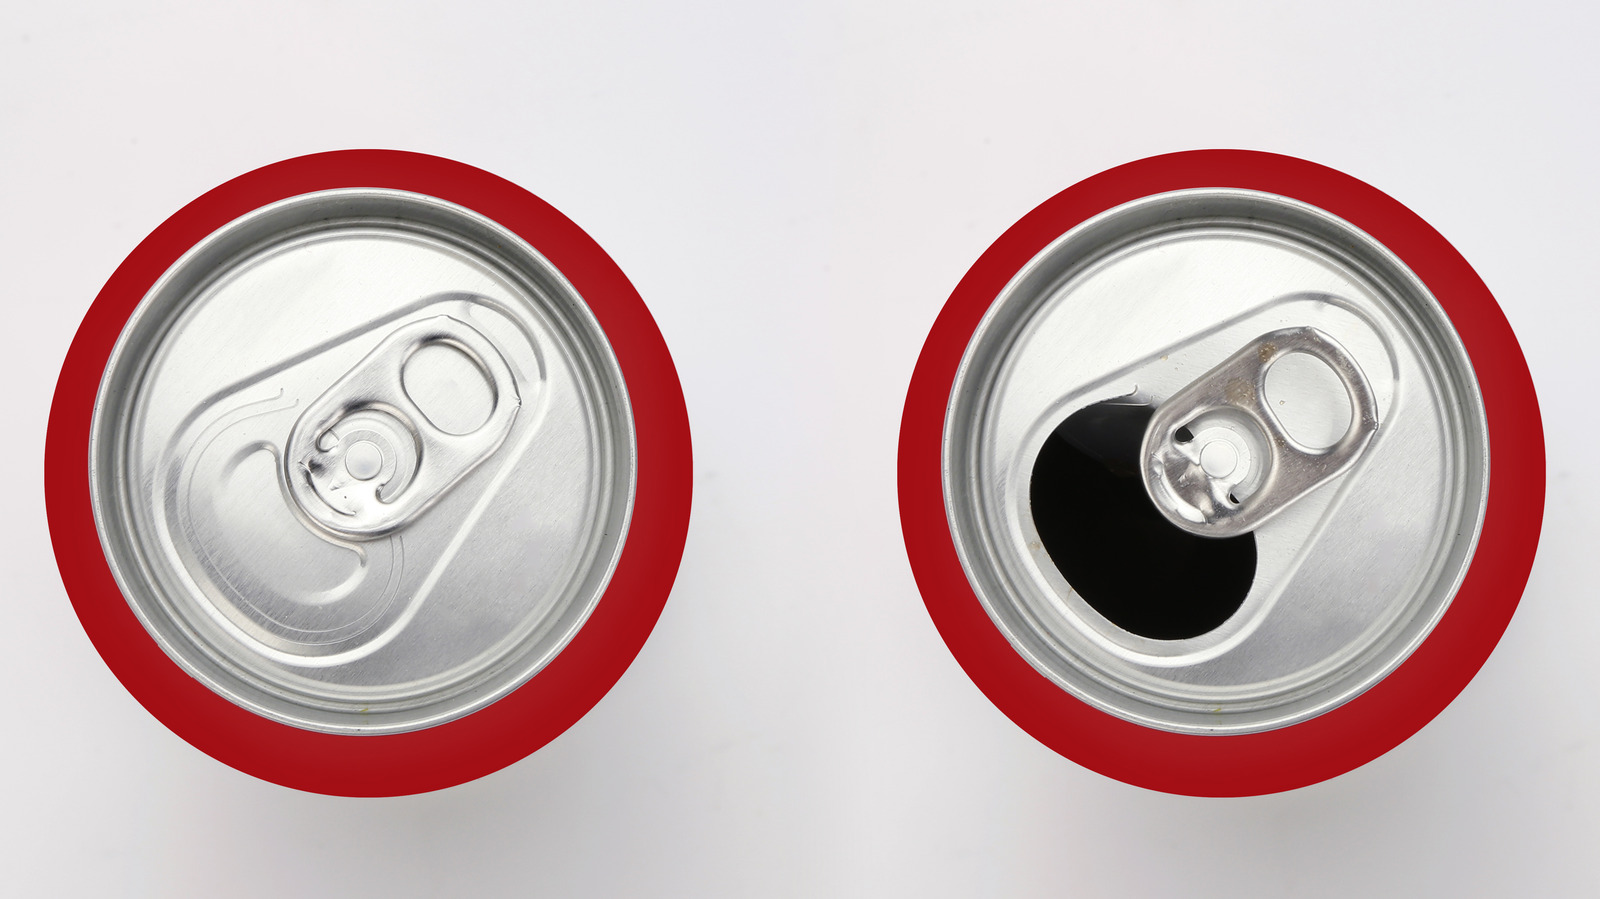 https://www.mashed.com/img/gallery/the-ingenious-way-to-use-the-built-in-hole-on-the-opening-tabs-of-soda-cans/l-intro-1677541881.jpg